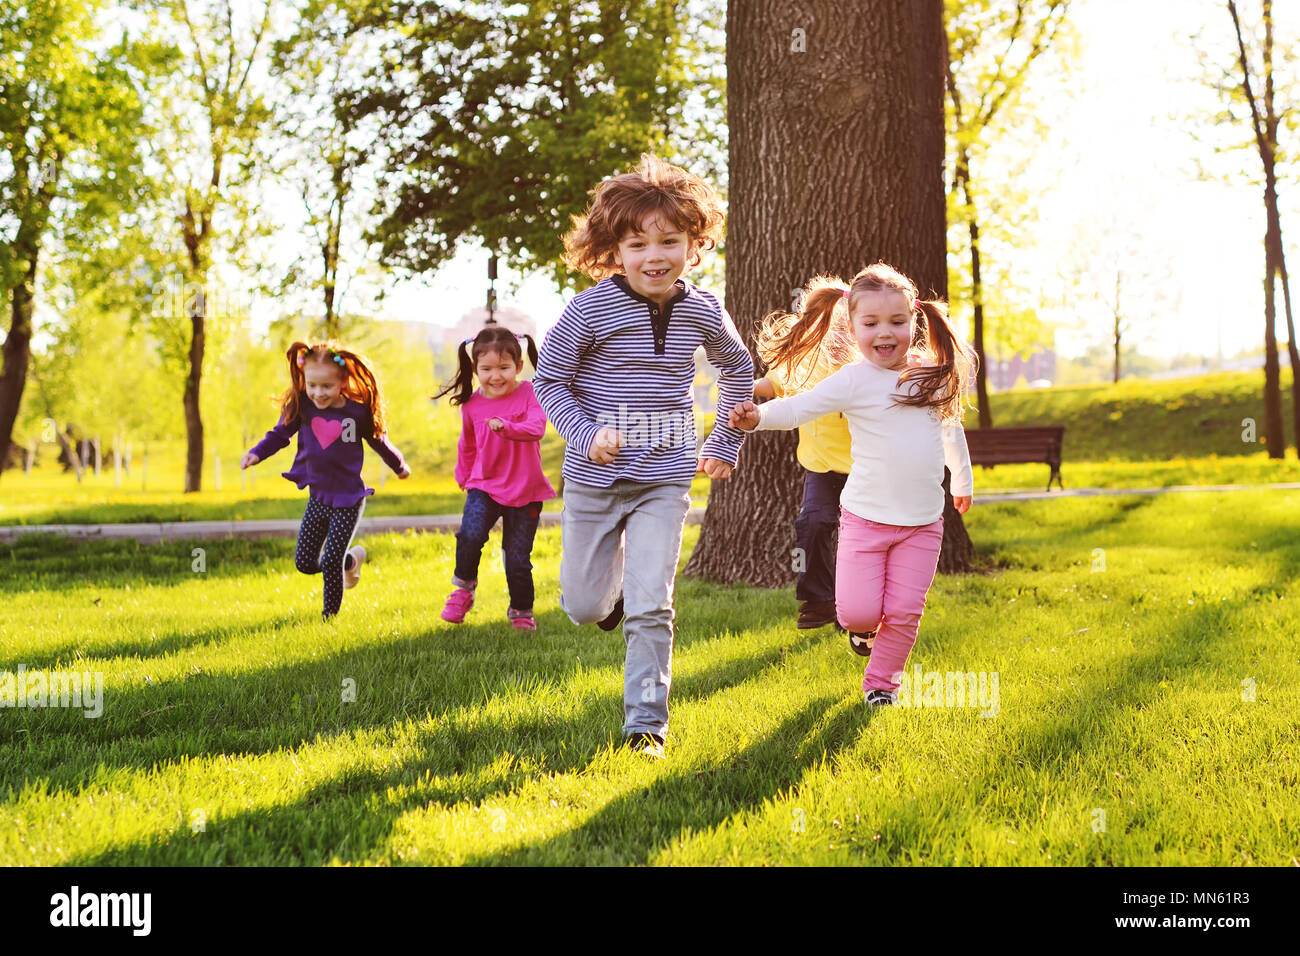 many young children smiling running along the grass in the park. Stock Photo